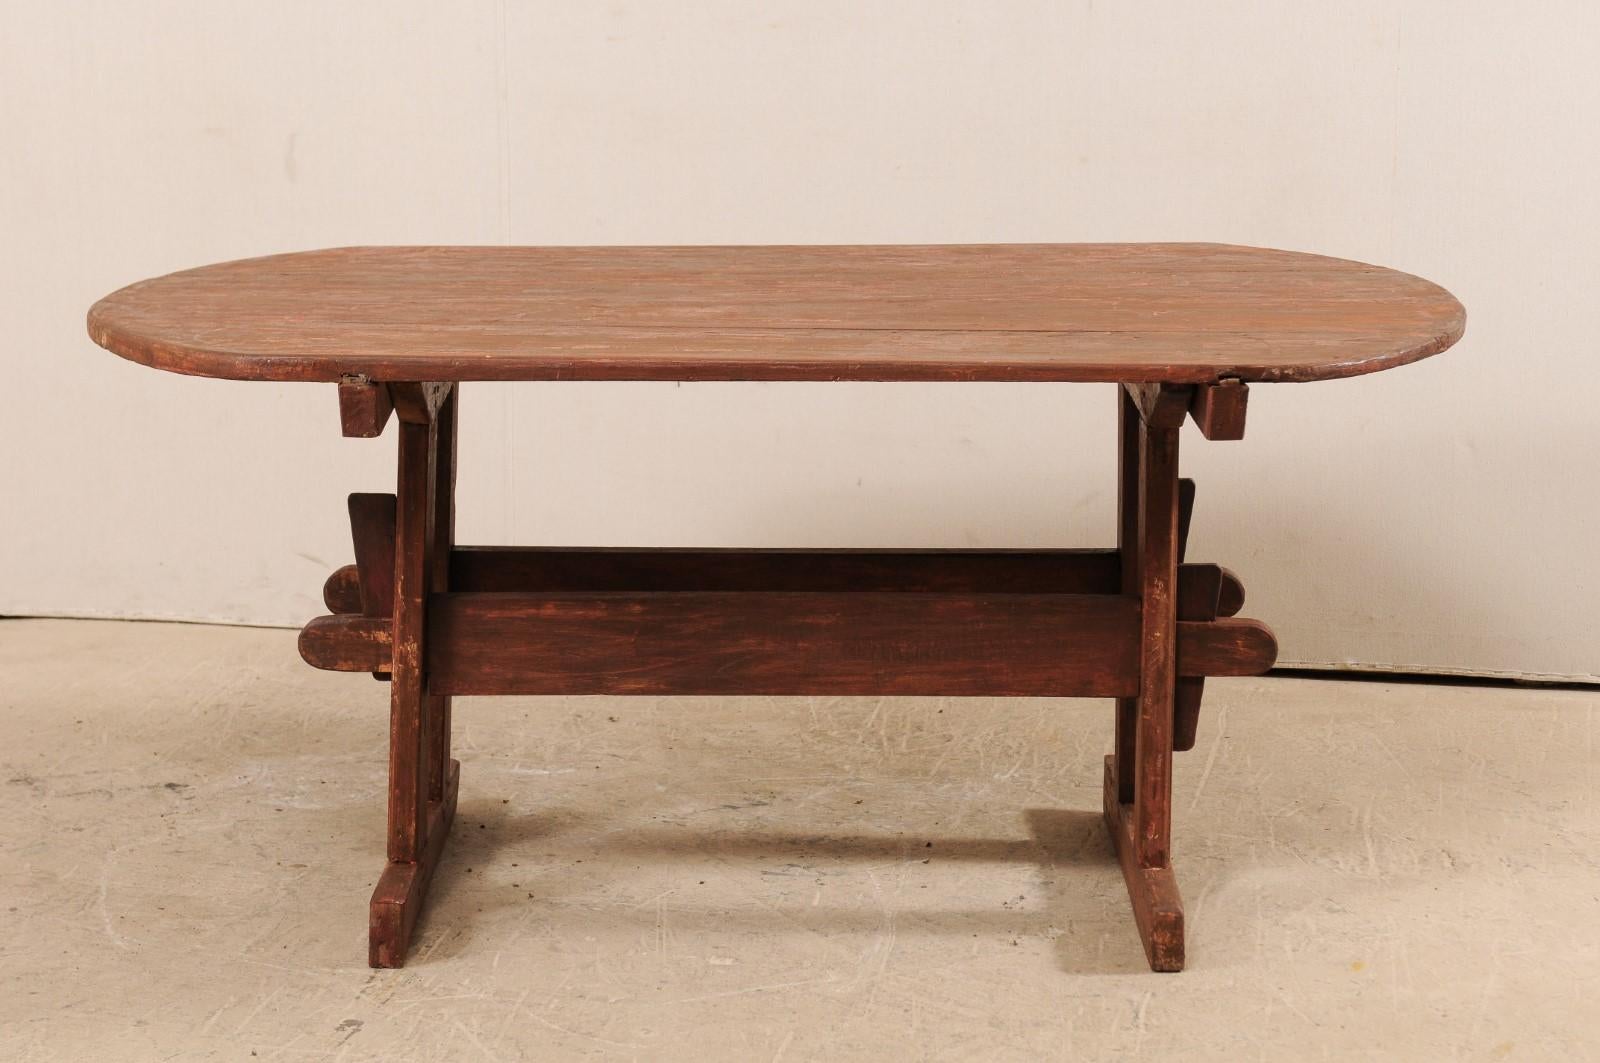 Carved Early 19th Century Swedish Falun Red Wood Trestle Breakfast Table or Desk For Sale